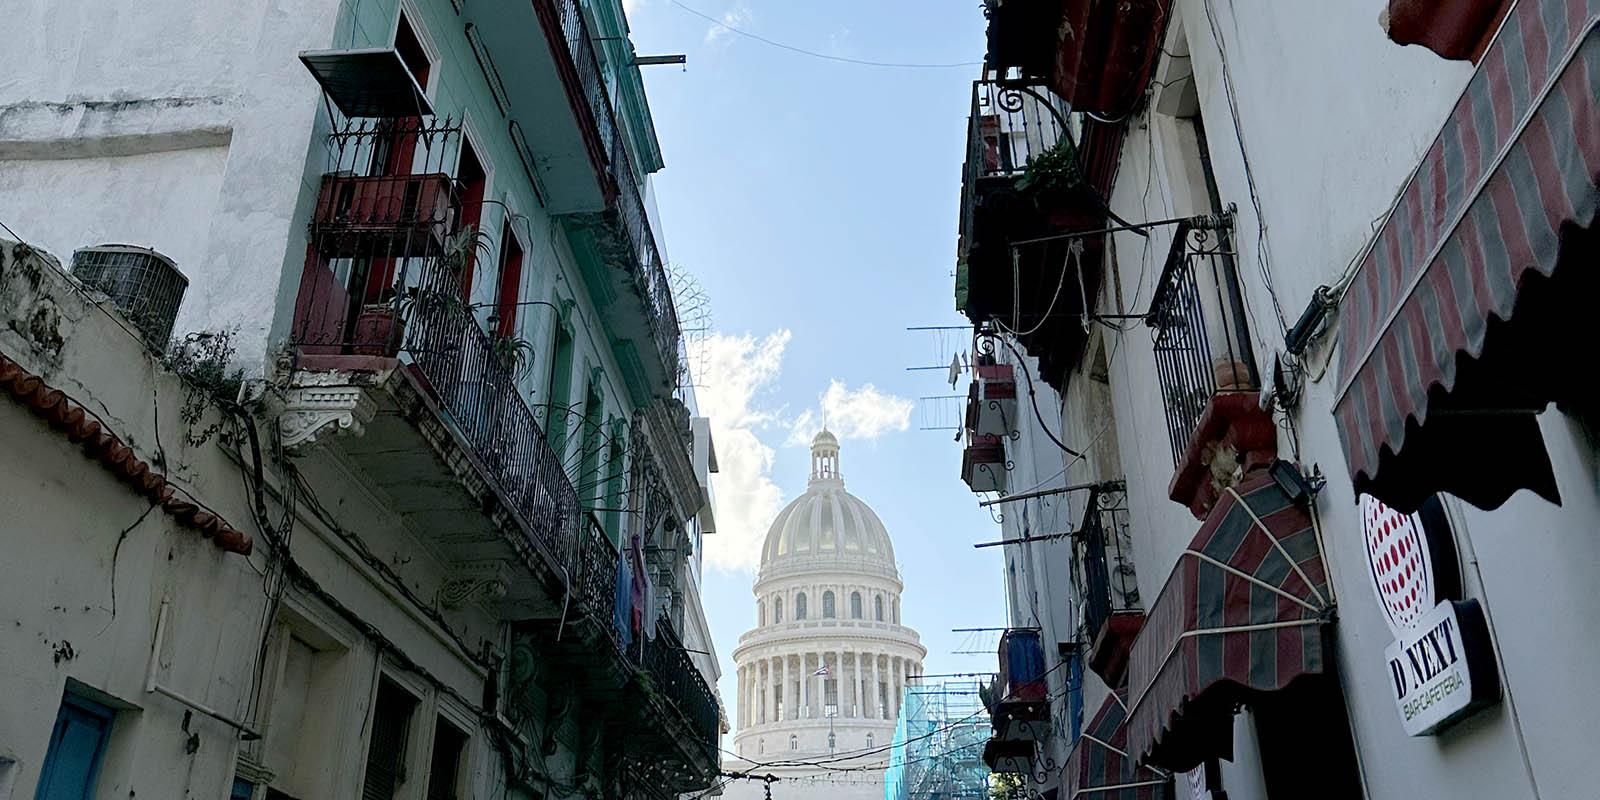 In the foreground building are falling apart and the Cuban capitol is in in the background